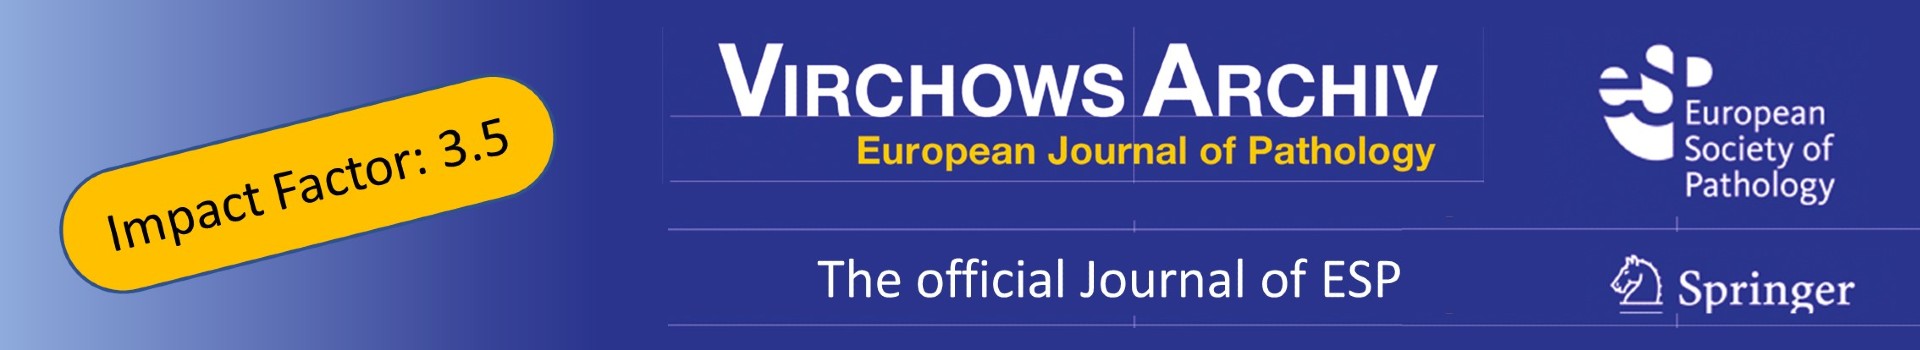 Virchows Archiv